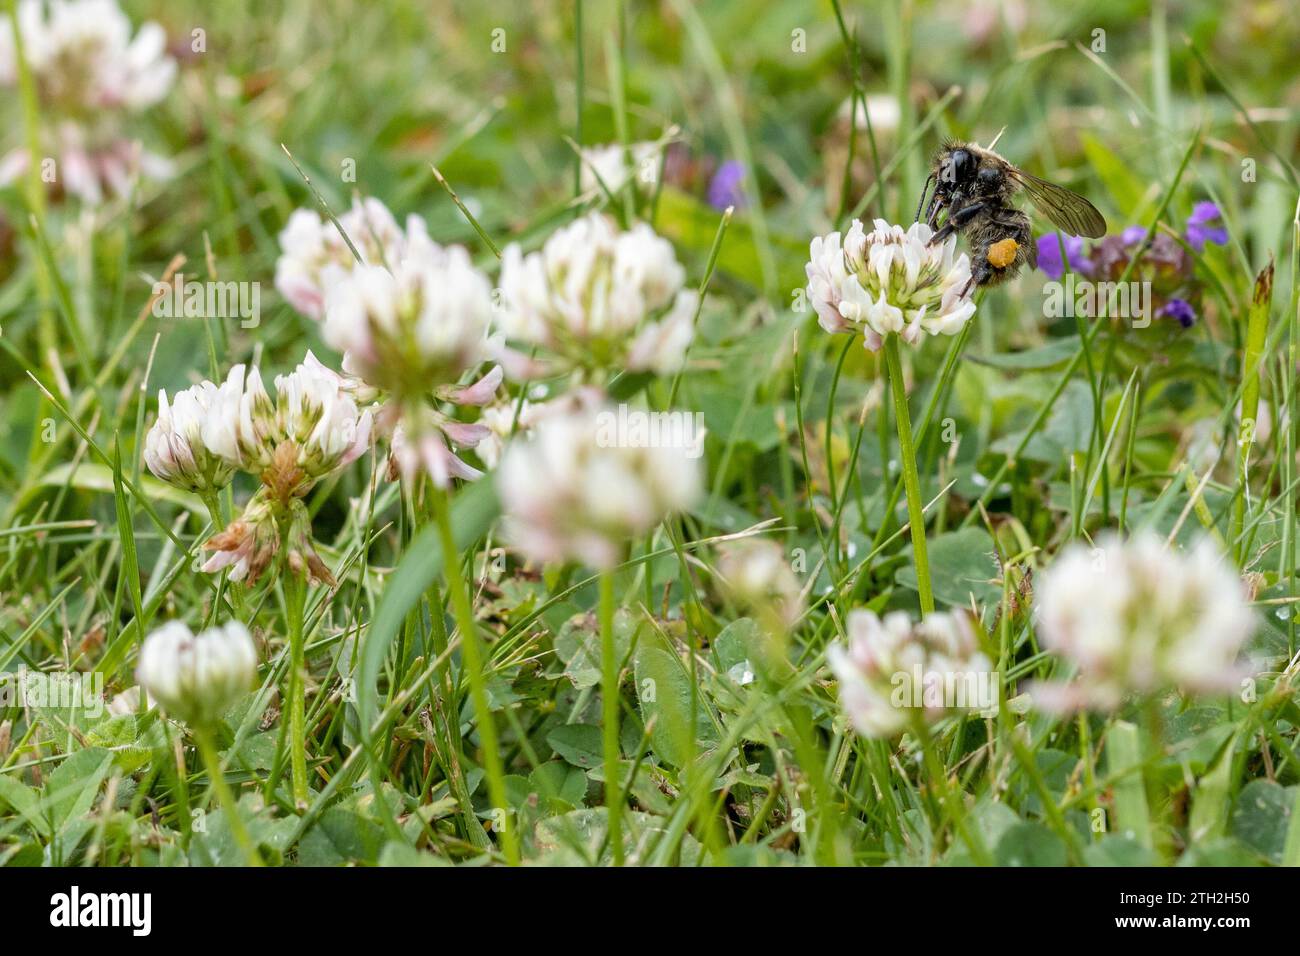 Bee collecting pollen from white clover (Trifolium repens) in a lawn, West Yorkshire, England, UK Stock Photo